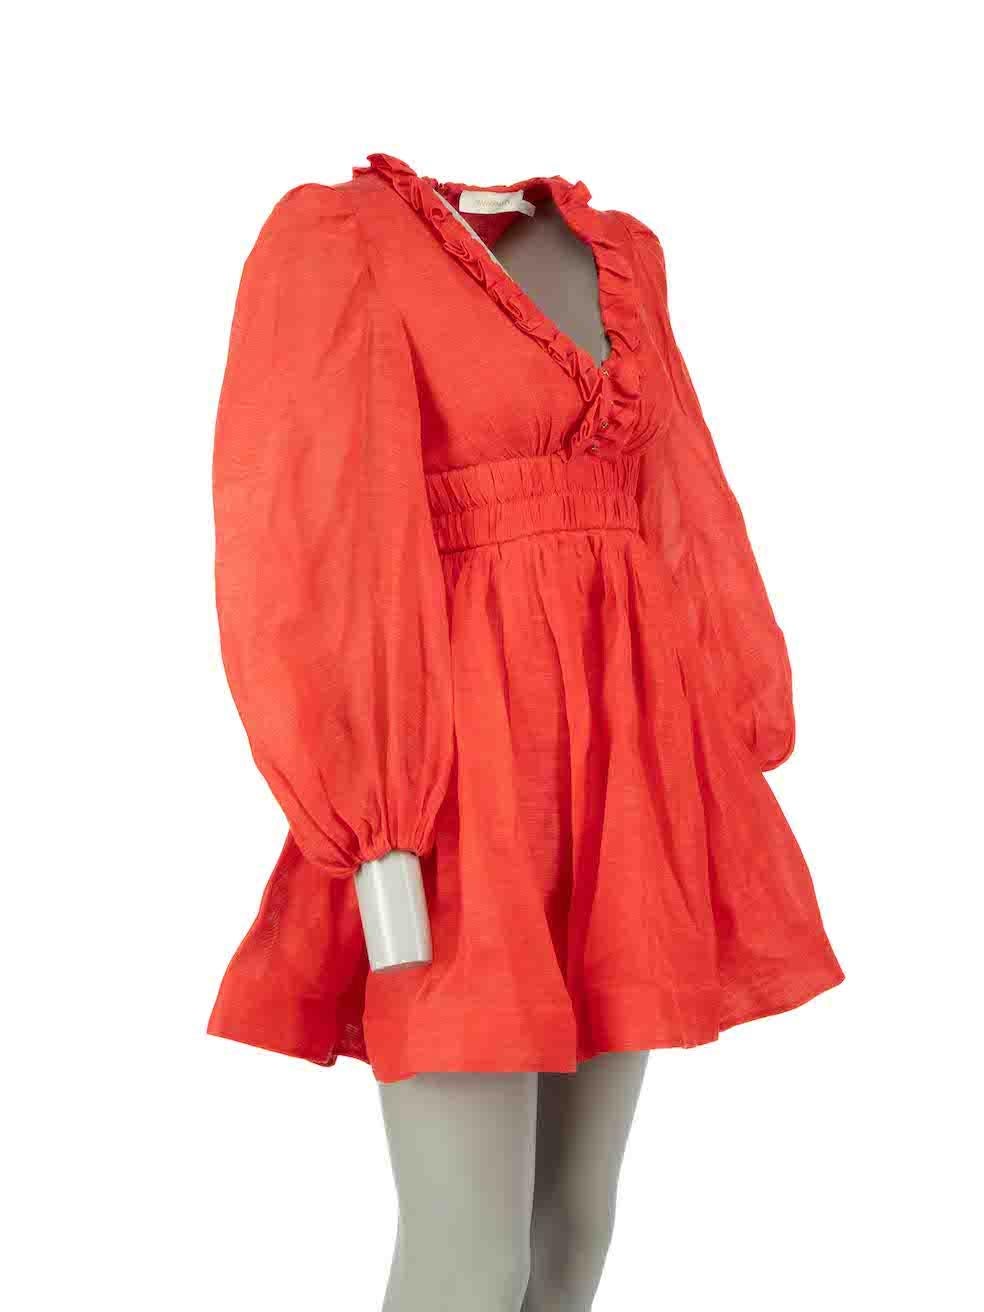 CONDITION is Very good. Minimal wear to dress is evident. Minimal stains to left sleeve and front of skirt on this used Zimmermann designer resale item.

Details
Coral red
Linen
Dress
Mini
Long puff sleeves
V-neck
Back zip fastening

Made in China